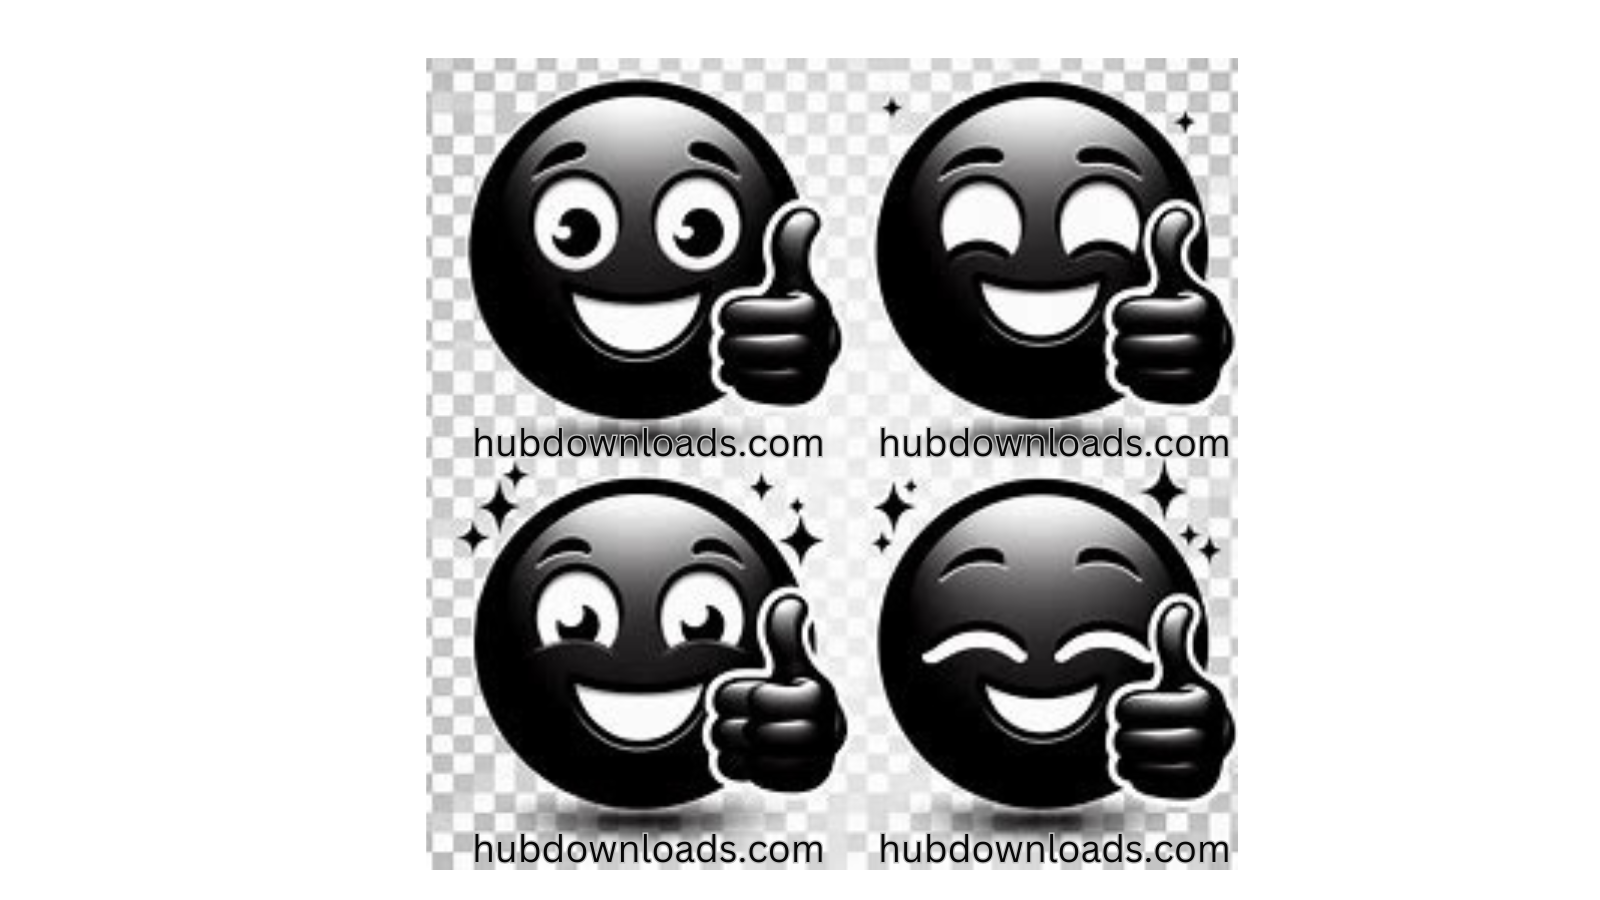 Four variations of the black thumbs up emoji, each with a different expression, including smiling, winking, and with sparkles.